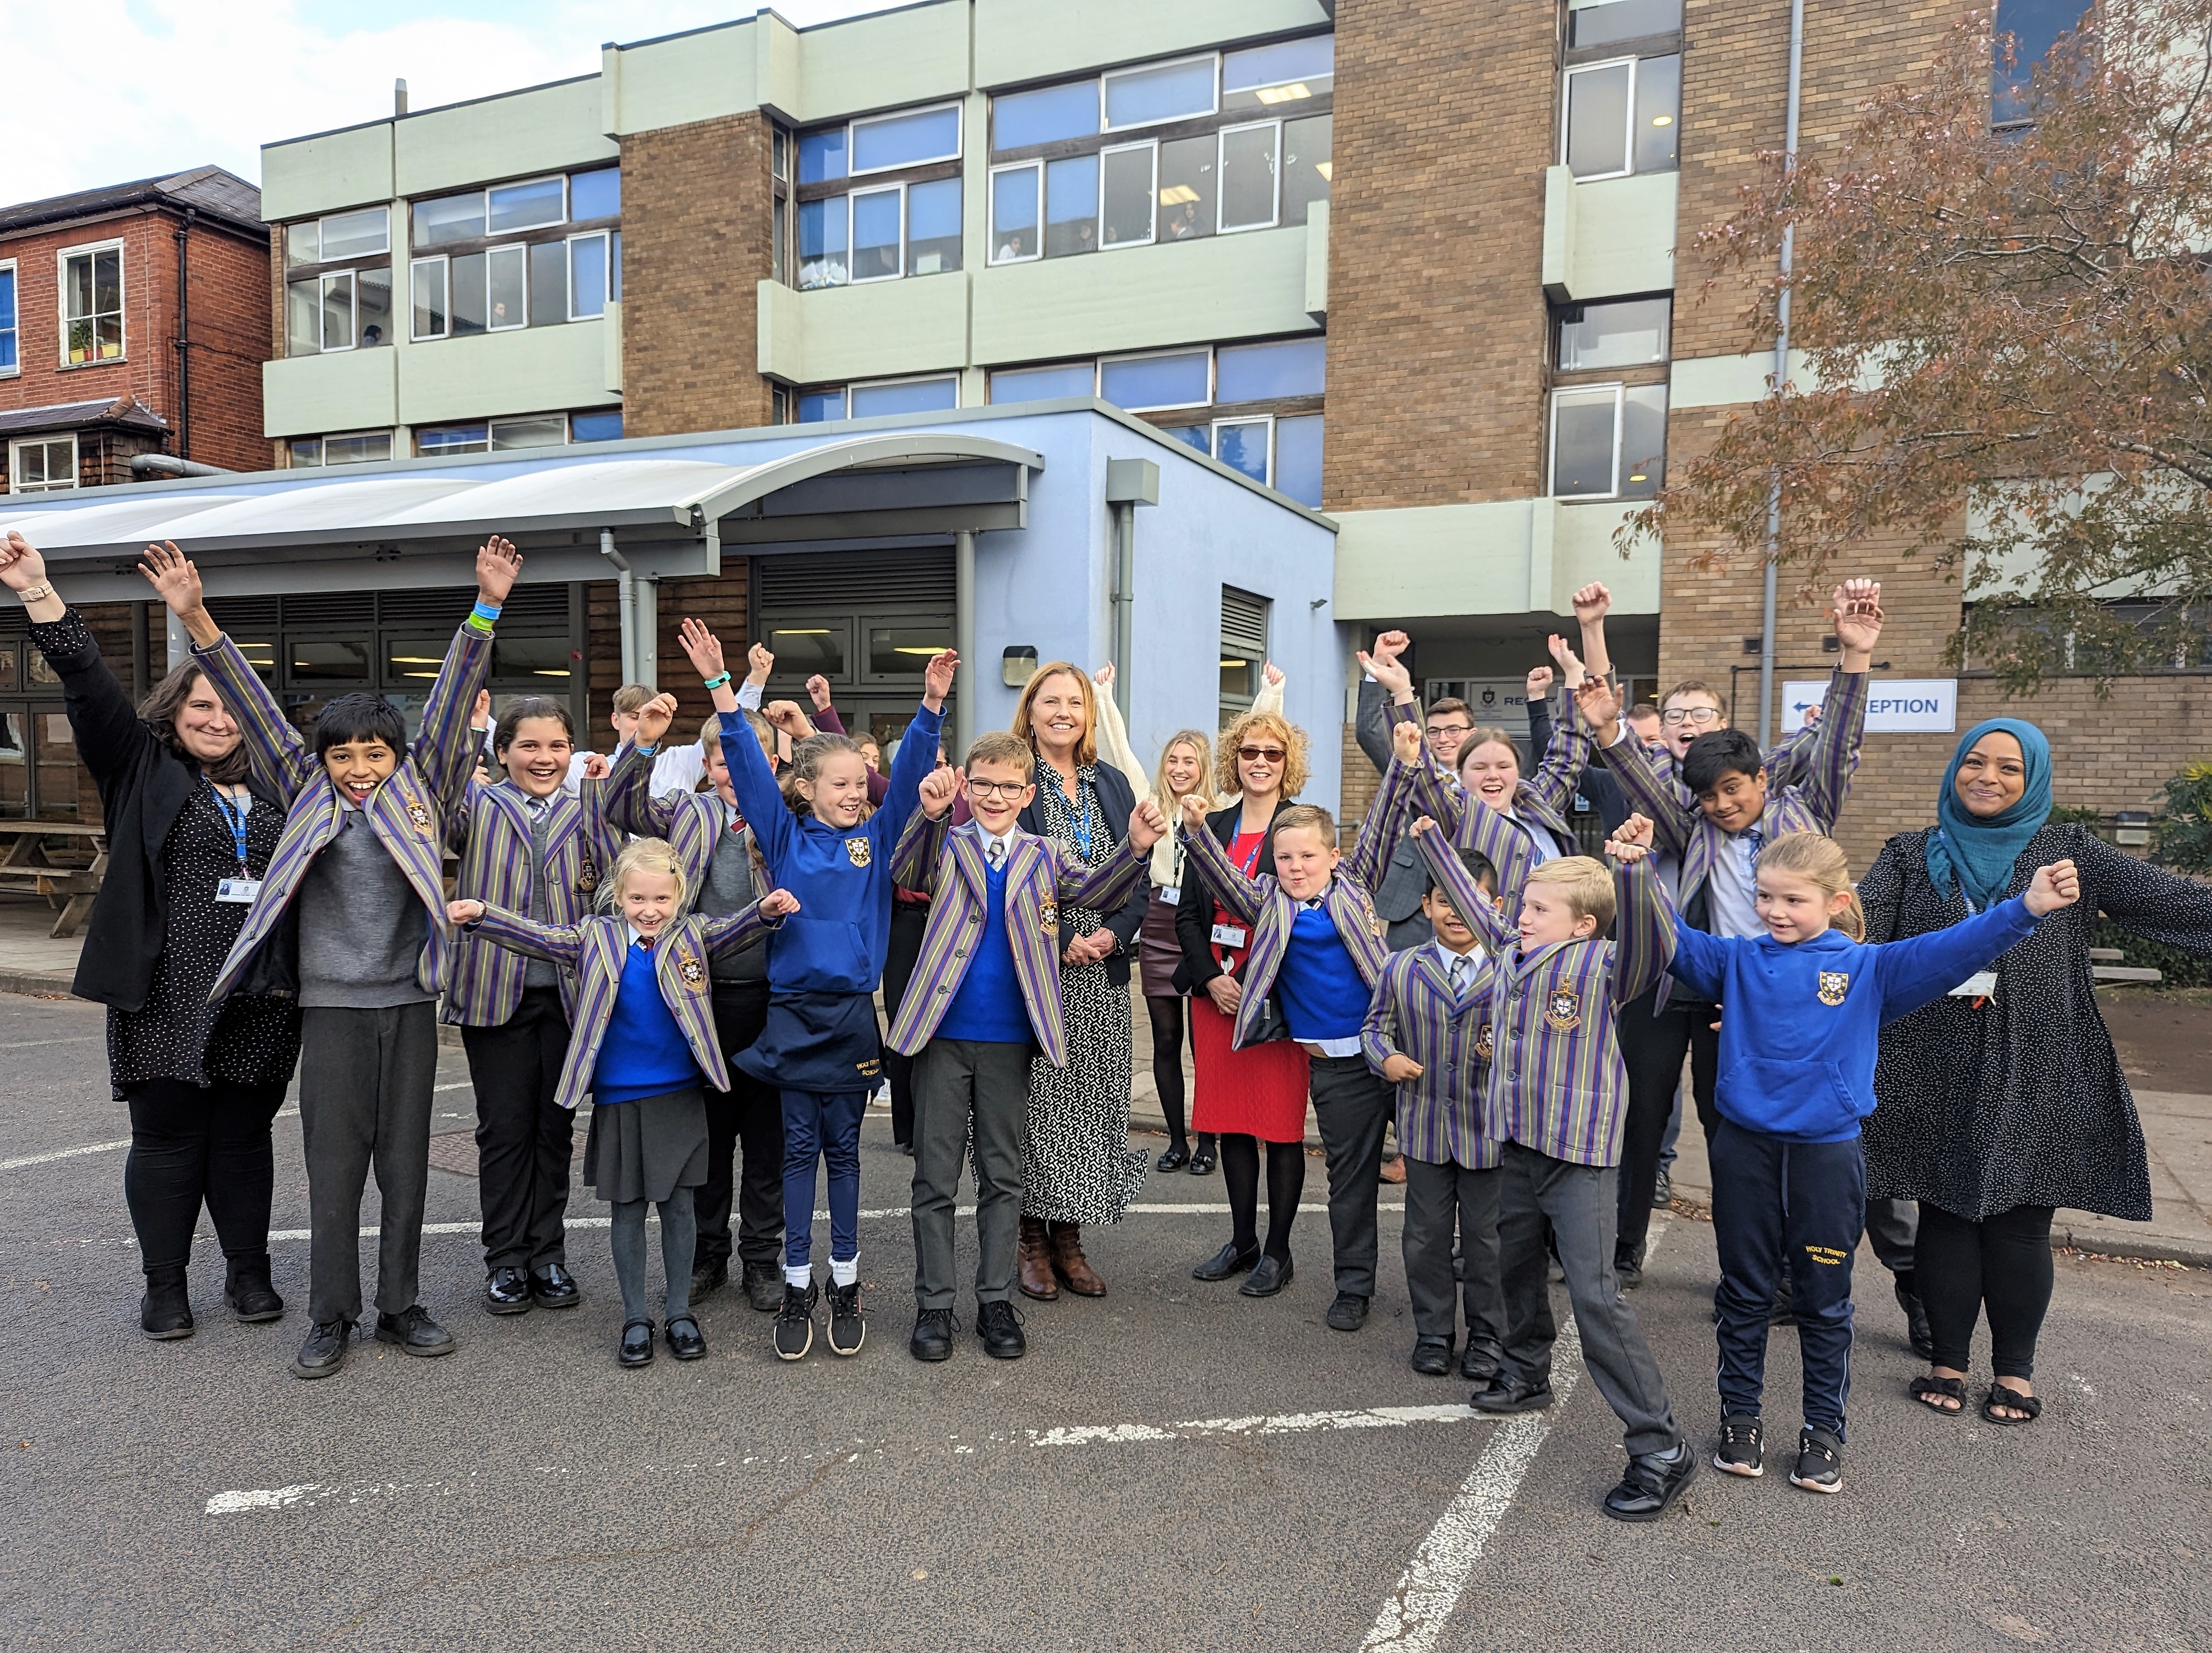 Kidderminster School Receives “Good” Ofsted Rating Throughout